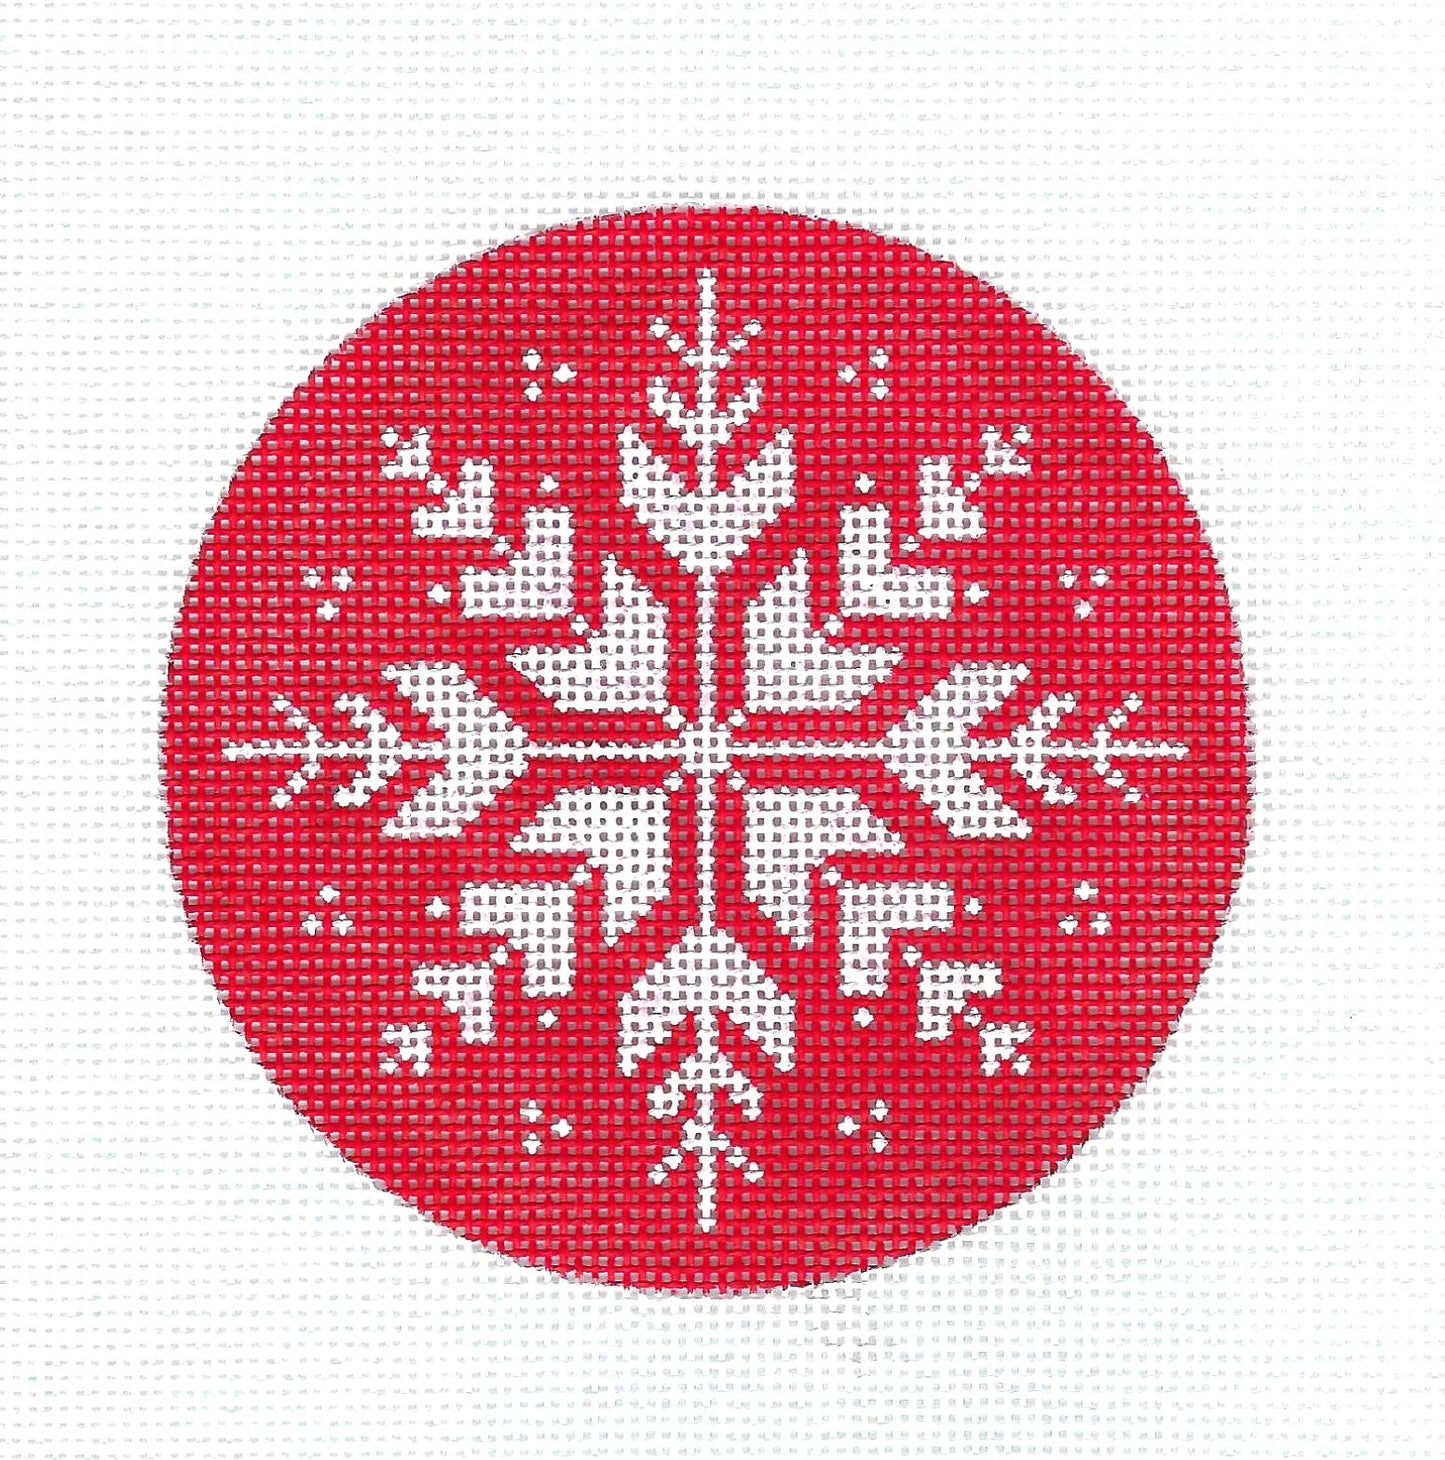 Snowflake on Red  handpainted 18 Mesh Needlepoint Ornament Canvas by Pepperberry